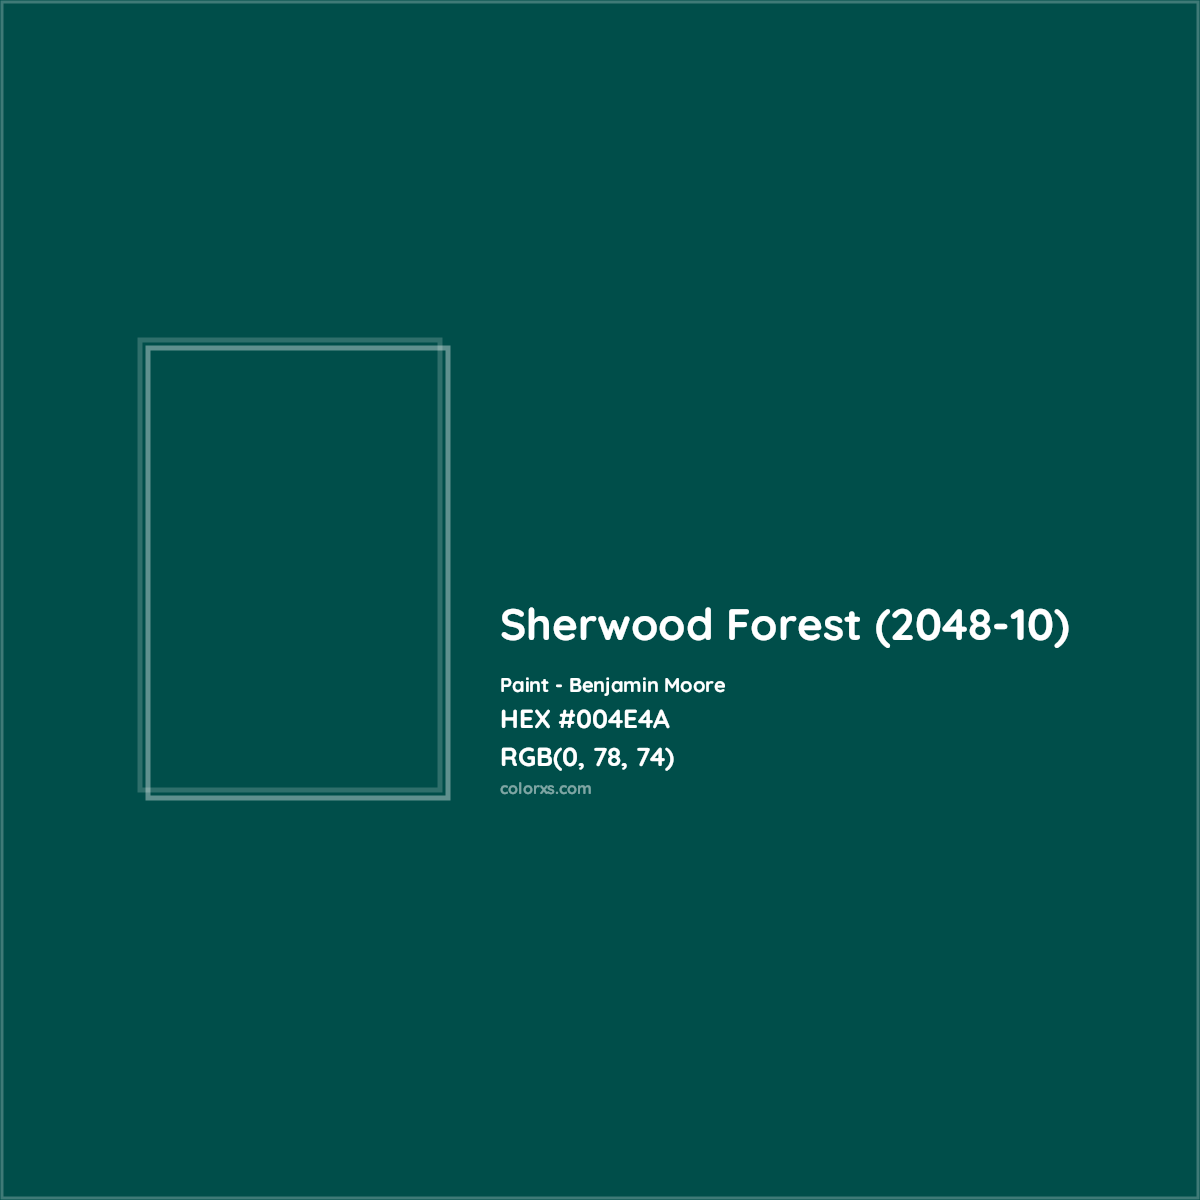 HEX #004E4A Sherwood Forest (2048-10) Paint Benjamin Moore - Color Code